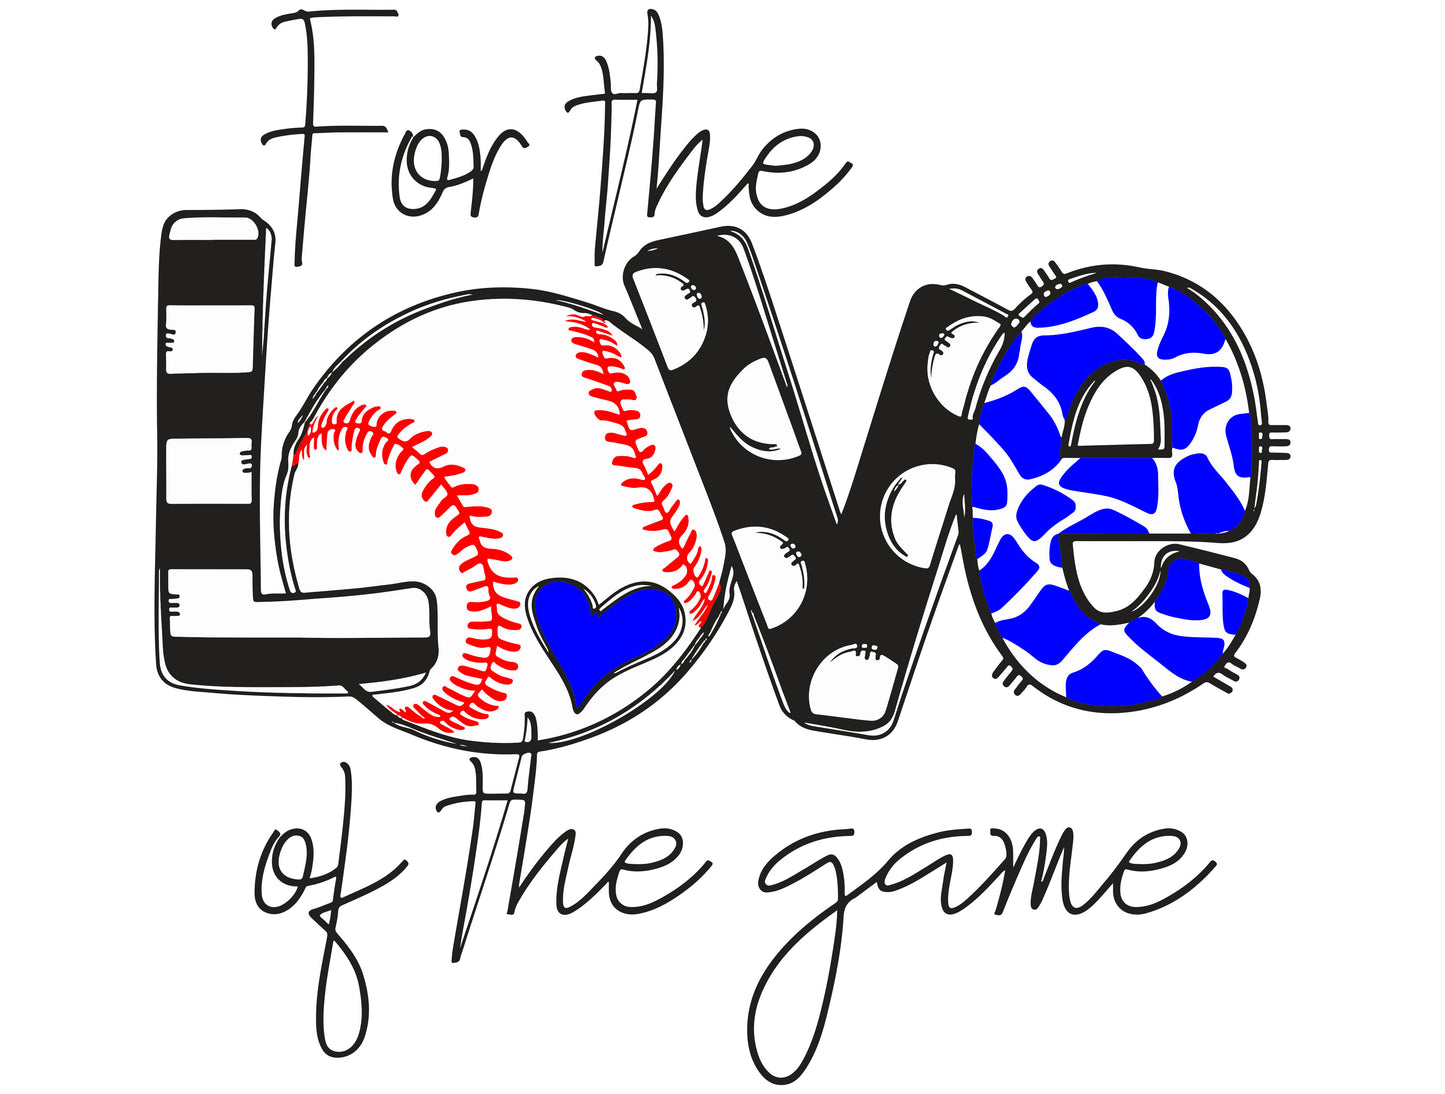 Baseball - For The Love Of The Game - Sport Grey Tee - Southern Grace Creations